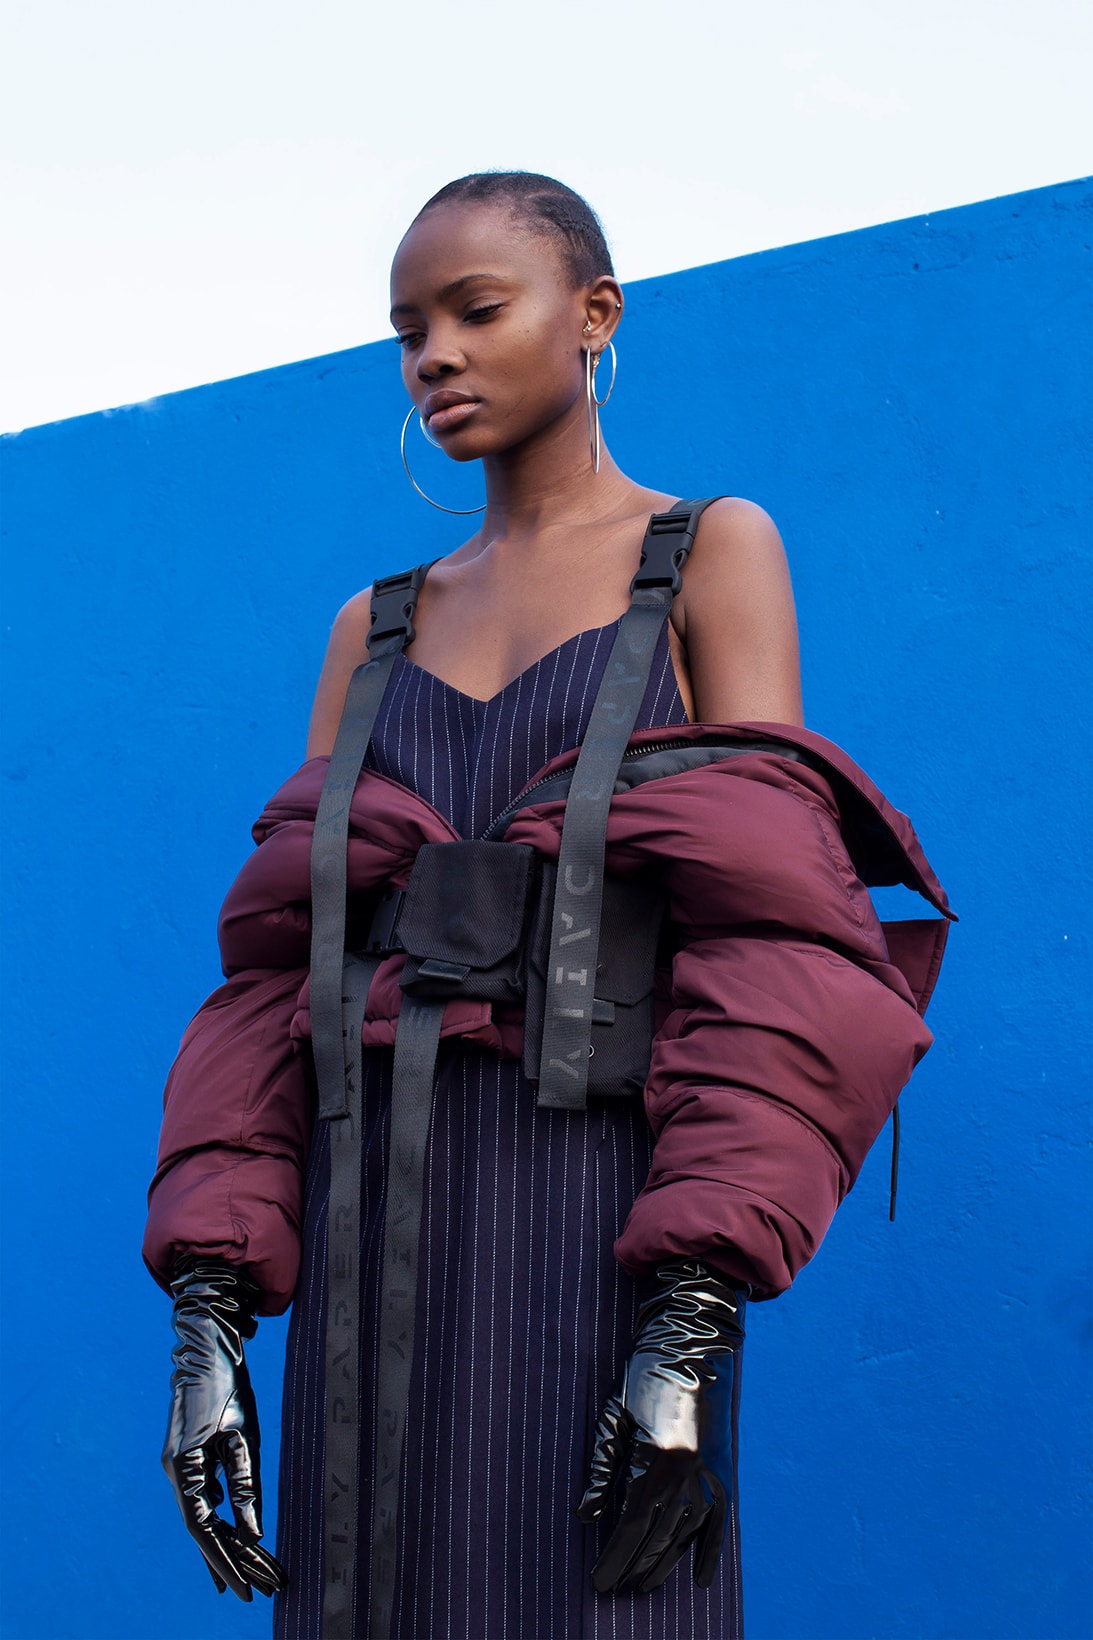 Daily Paper Fall Winter 2017 Children of the City Collection Lookbook South Africa